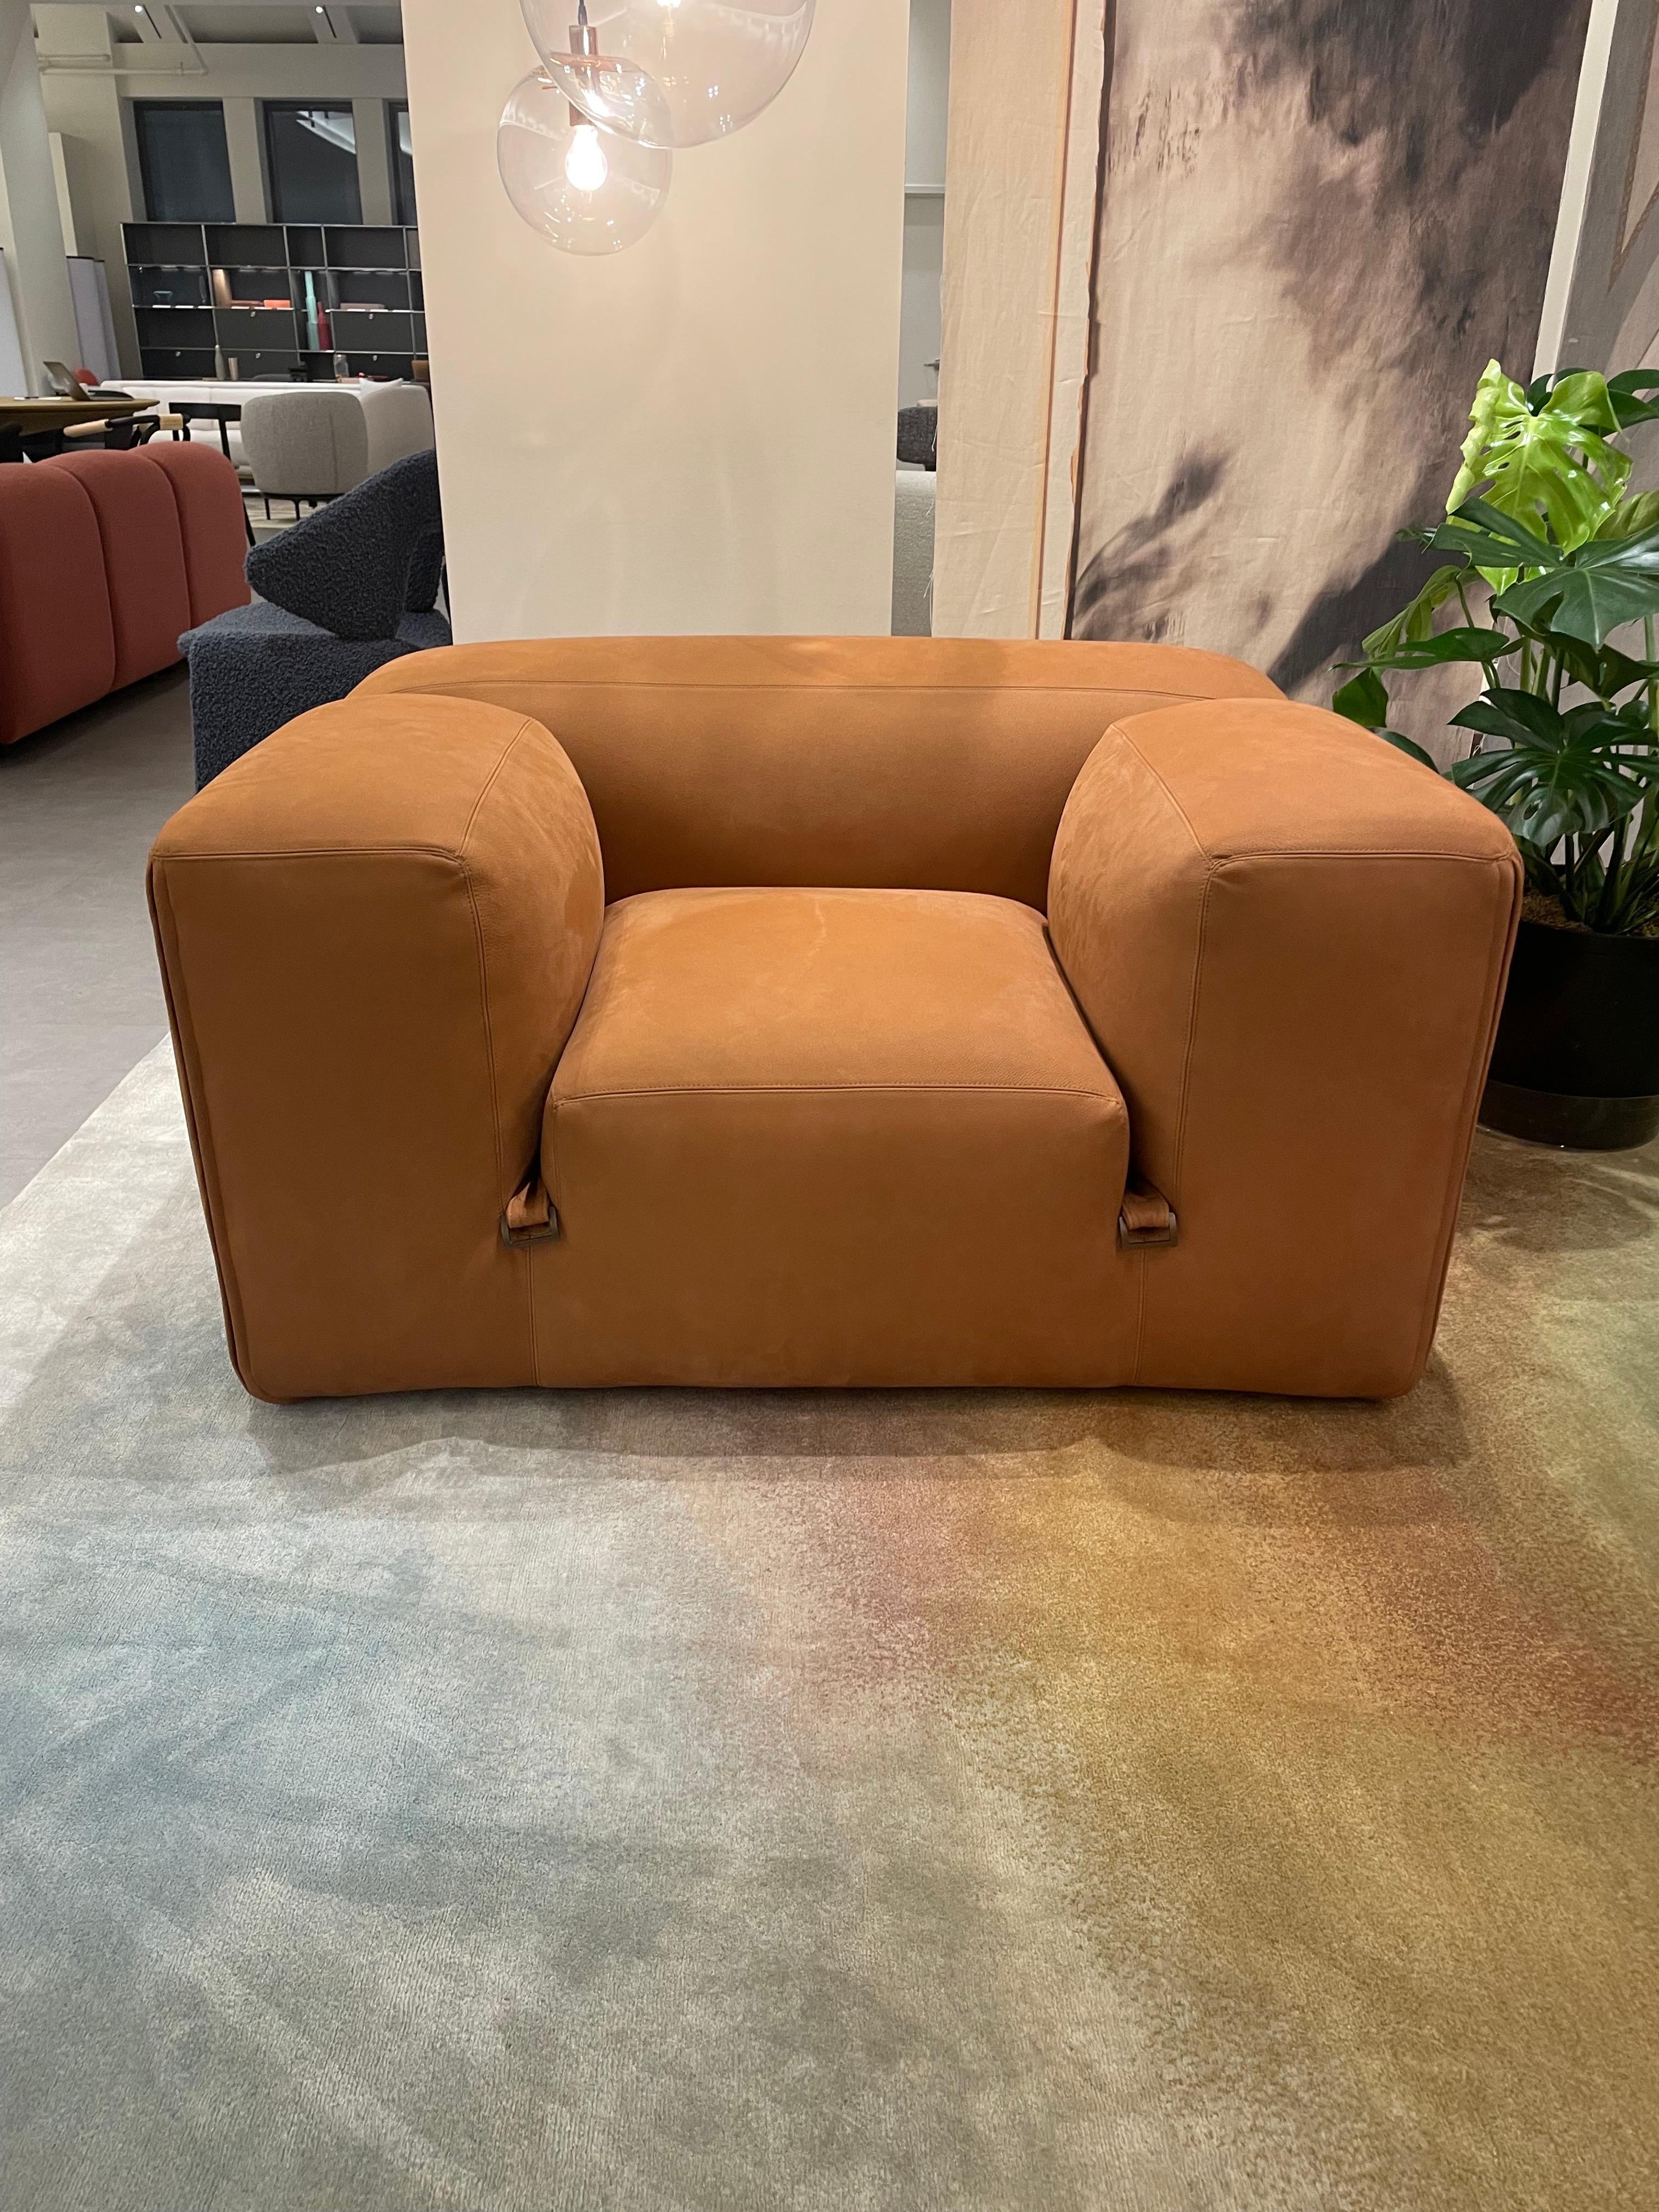 Le Mura Armchair
upholstered in Zahir 10 cat. Z aniline leather
Zipper T47


The project Le Mura by Mario Bellini represents the manifesto of a radical design that went through all the Italian 70s: design was as an answer to questions not only